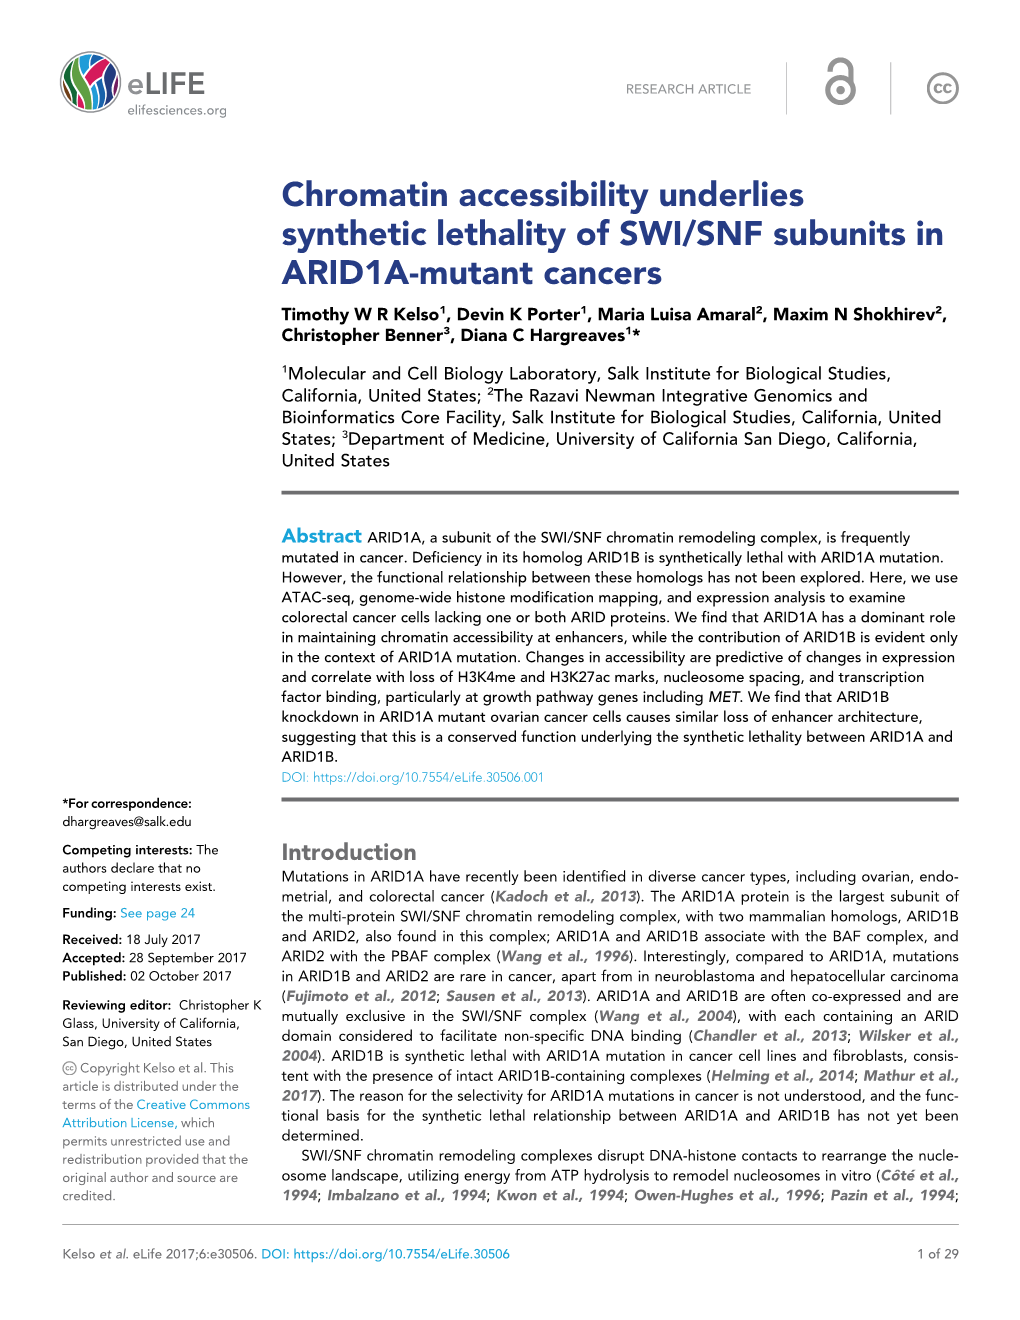 Chromatin Accessibility Underlies Synthetic Lethality of SWI/SNF